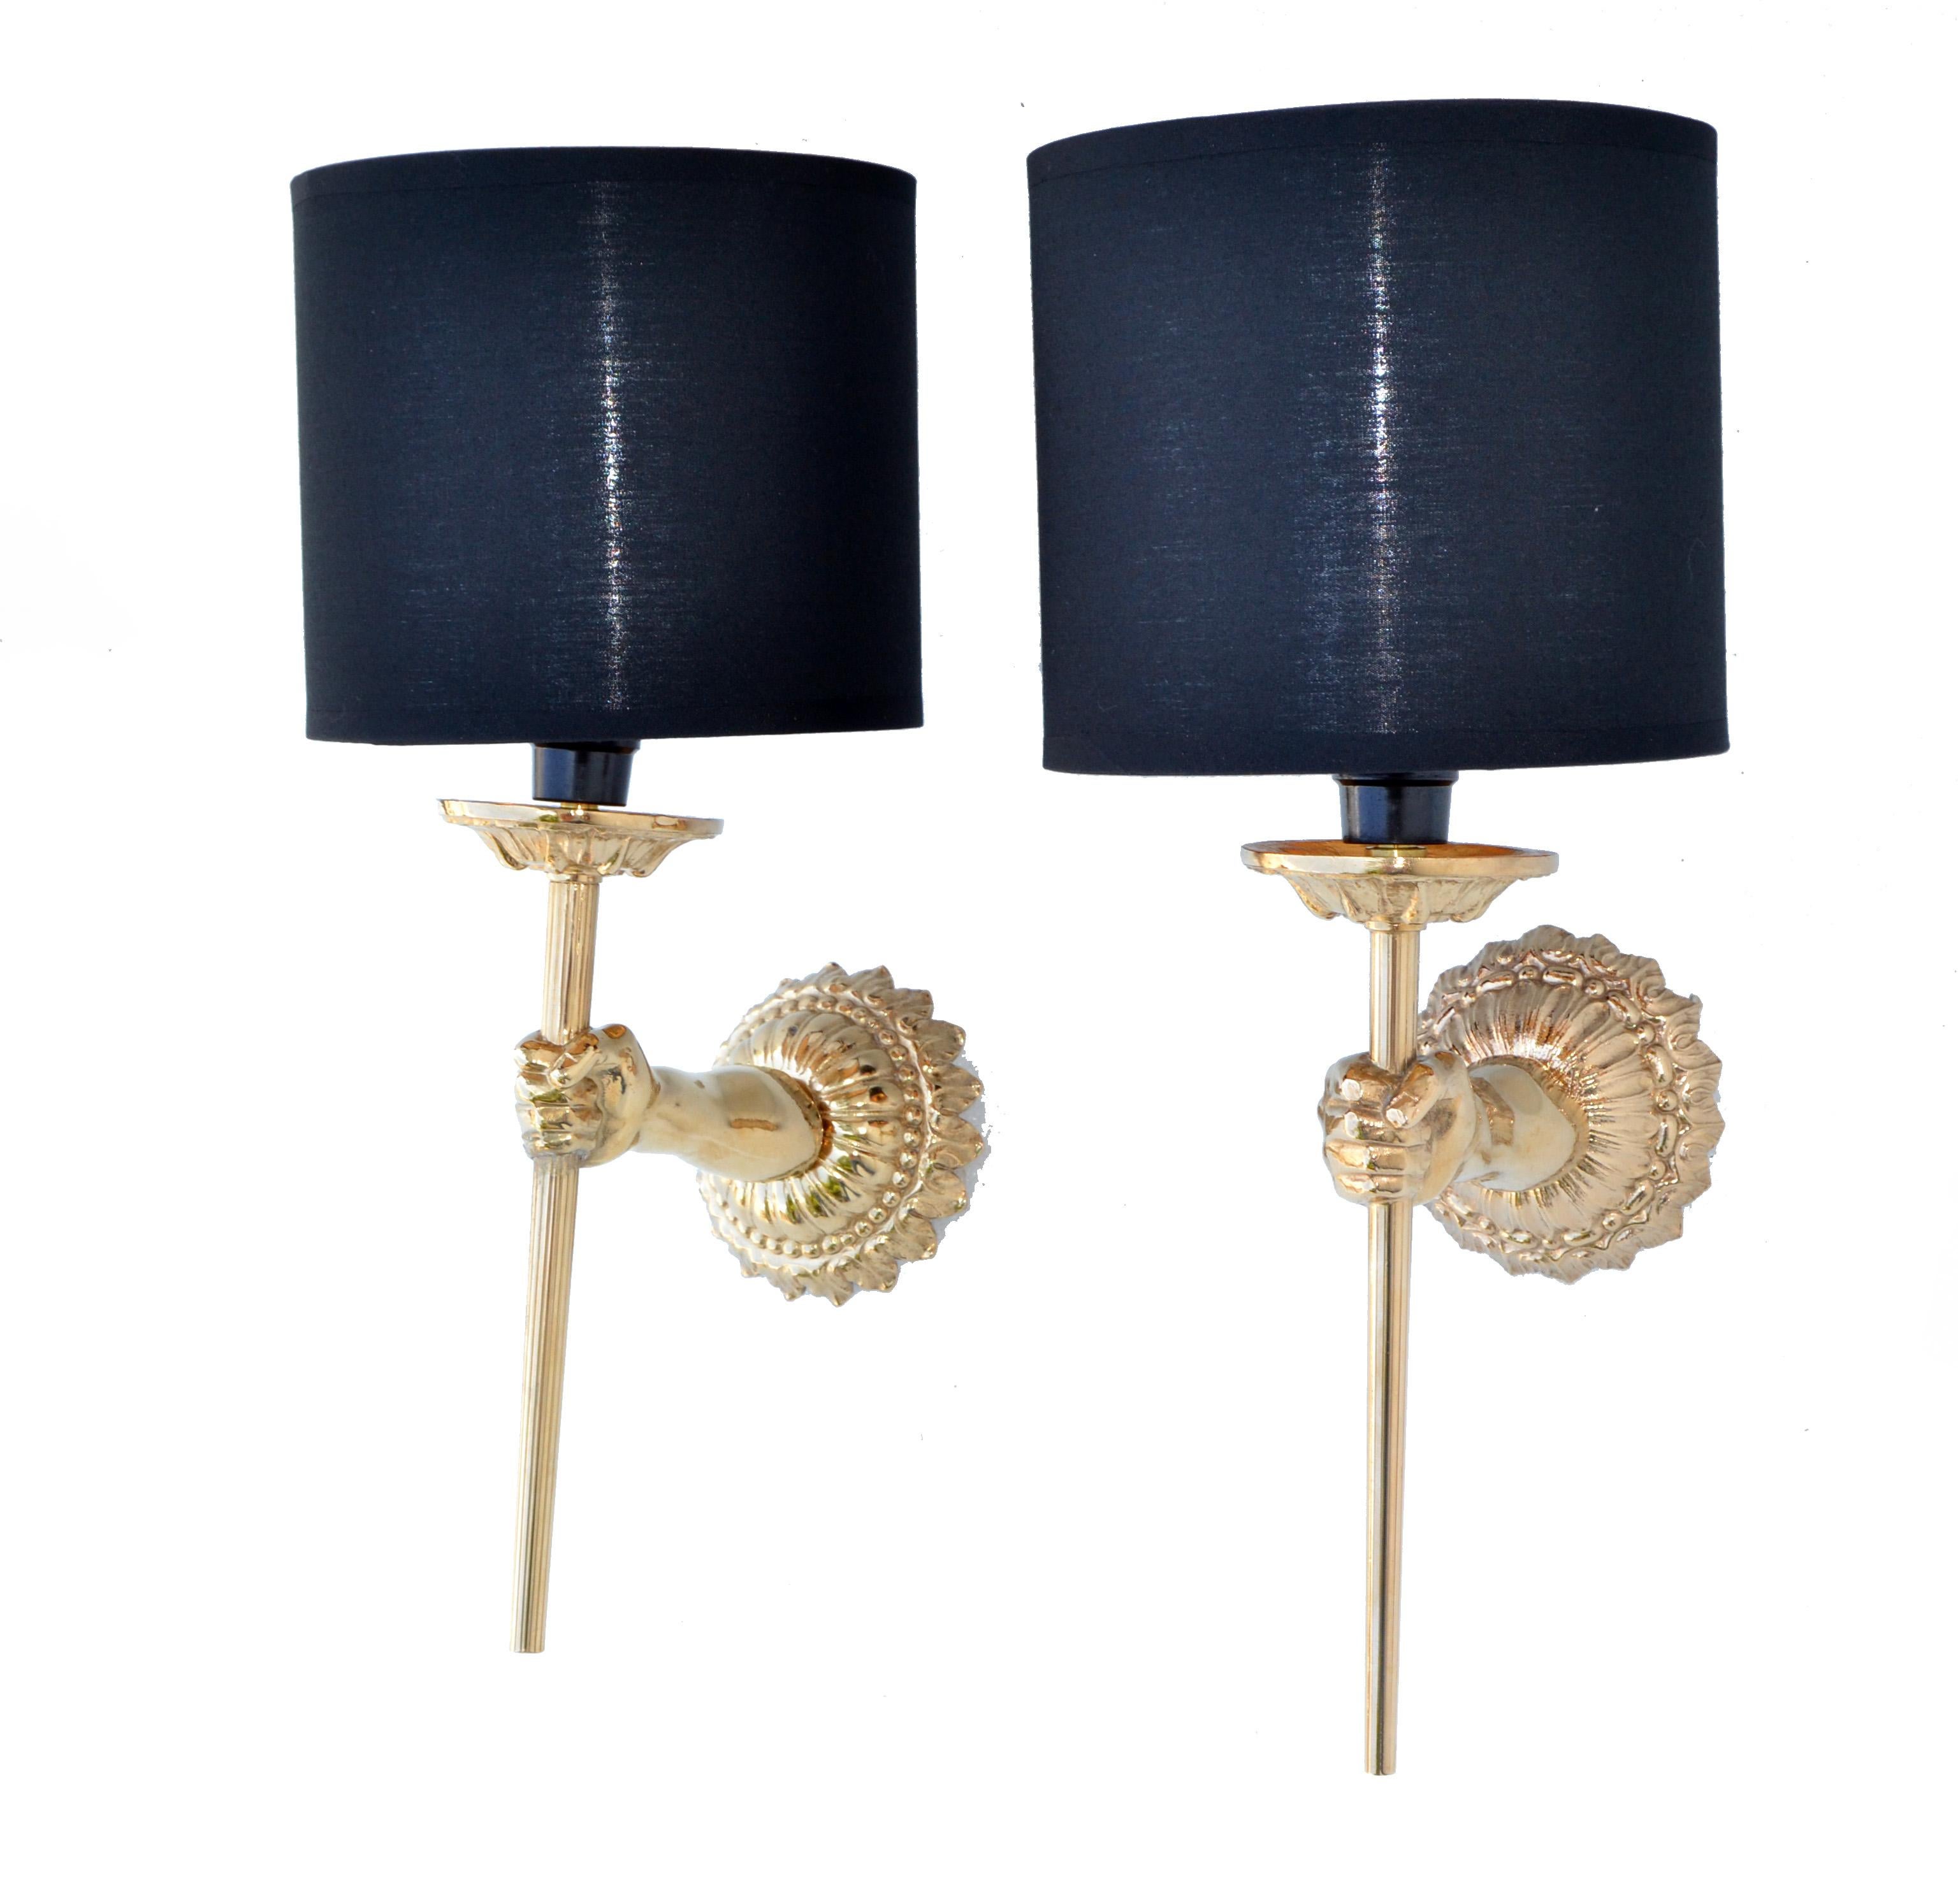 Neoclassical Pair of Maison Lancel Sconces Gold Plated Hand Sconces Torch & Shade France 1960